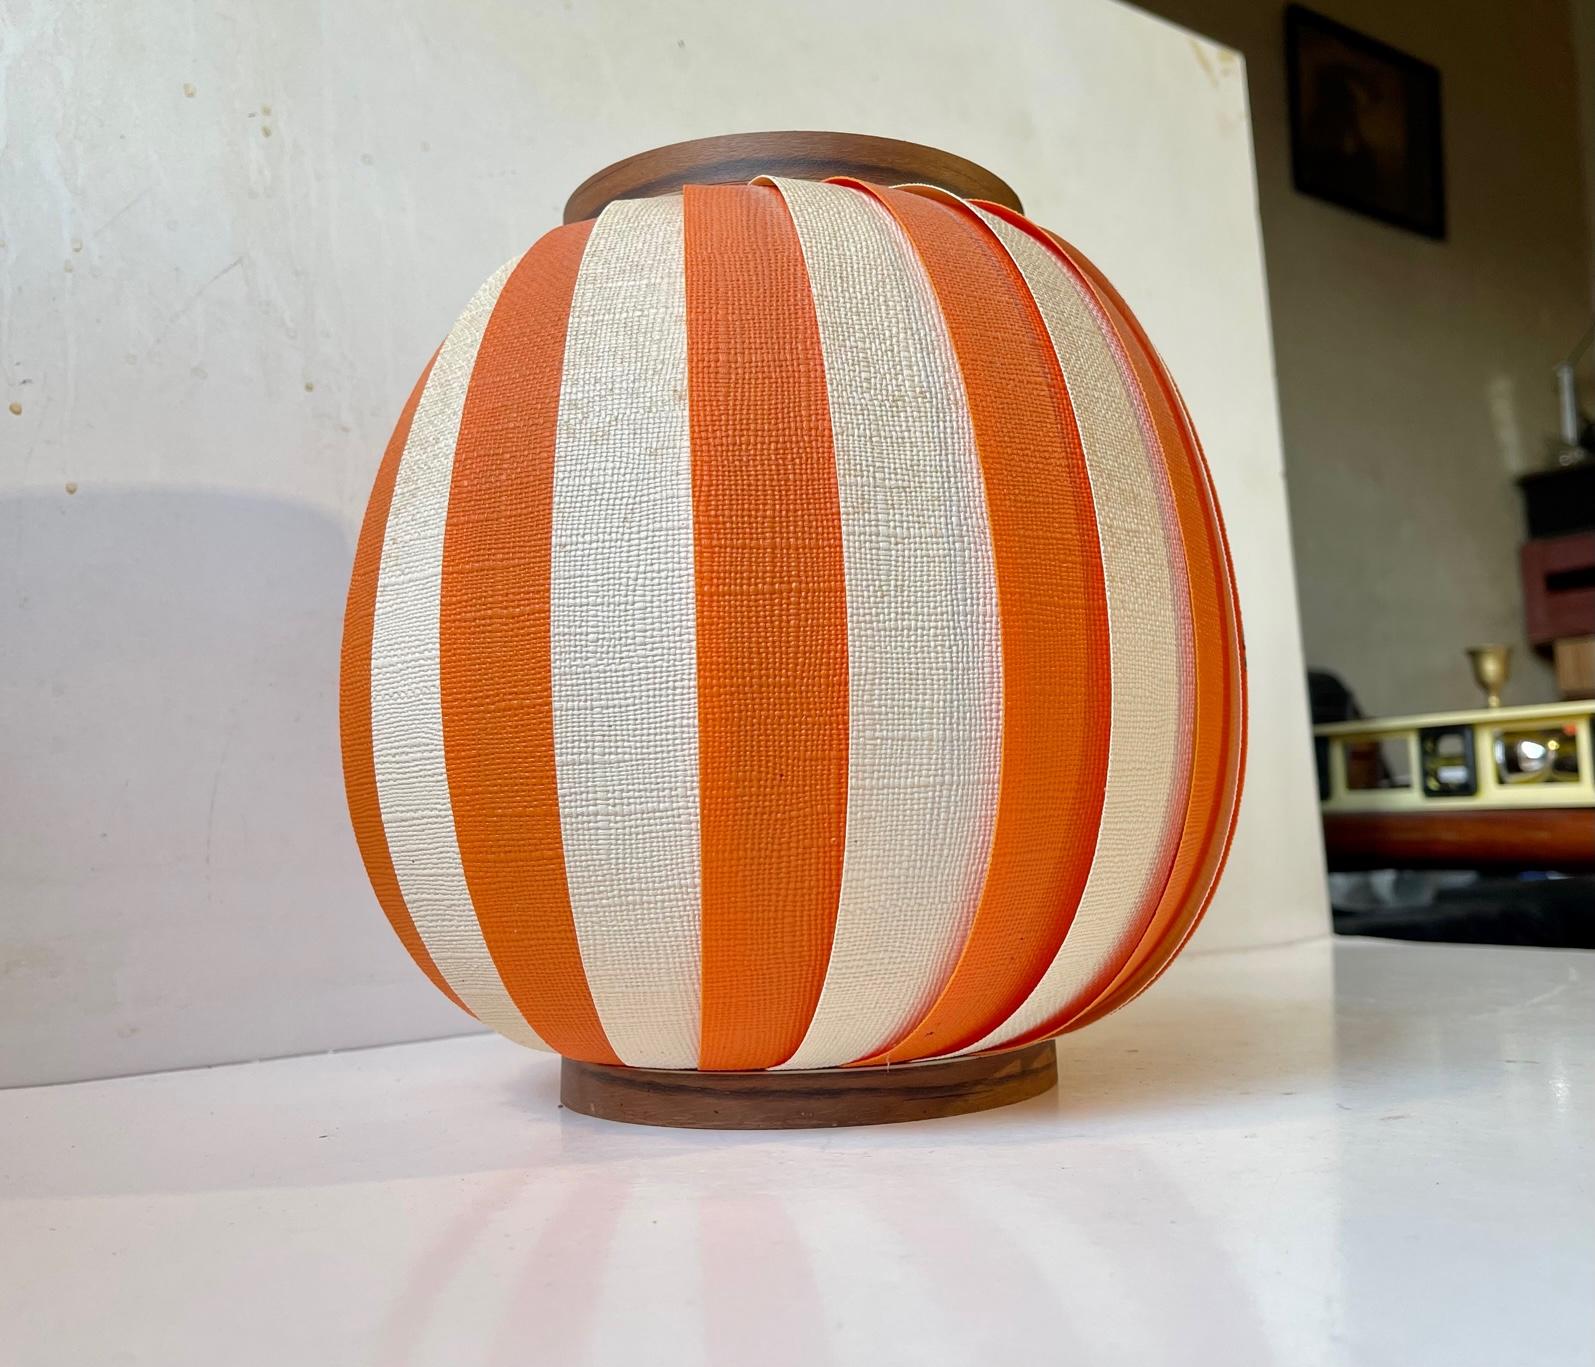 A bonbon striped acrylic pendant lamp called Bojan or Cocoon. This striped version is rare and it was designed by Lars E. Schiøler and manufactured by Høyrup in Denmark during the late 1950s or early 60s. Similar designs surfaced from Le Klint,